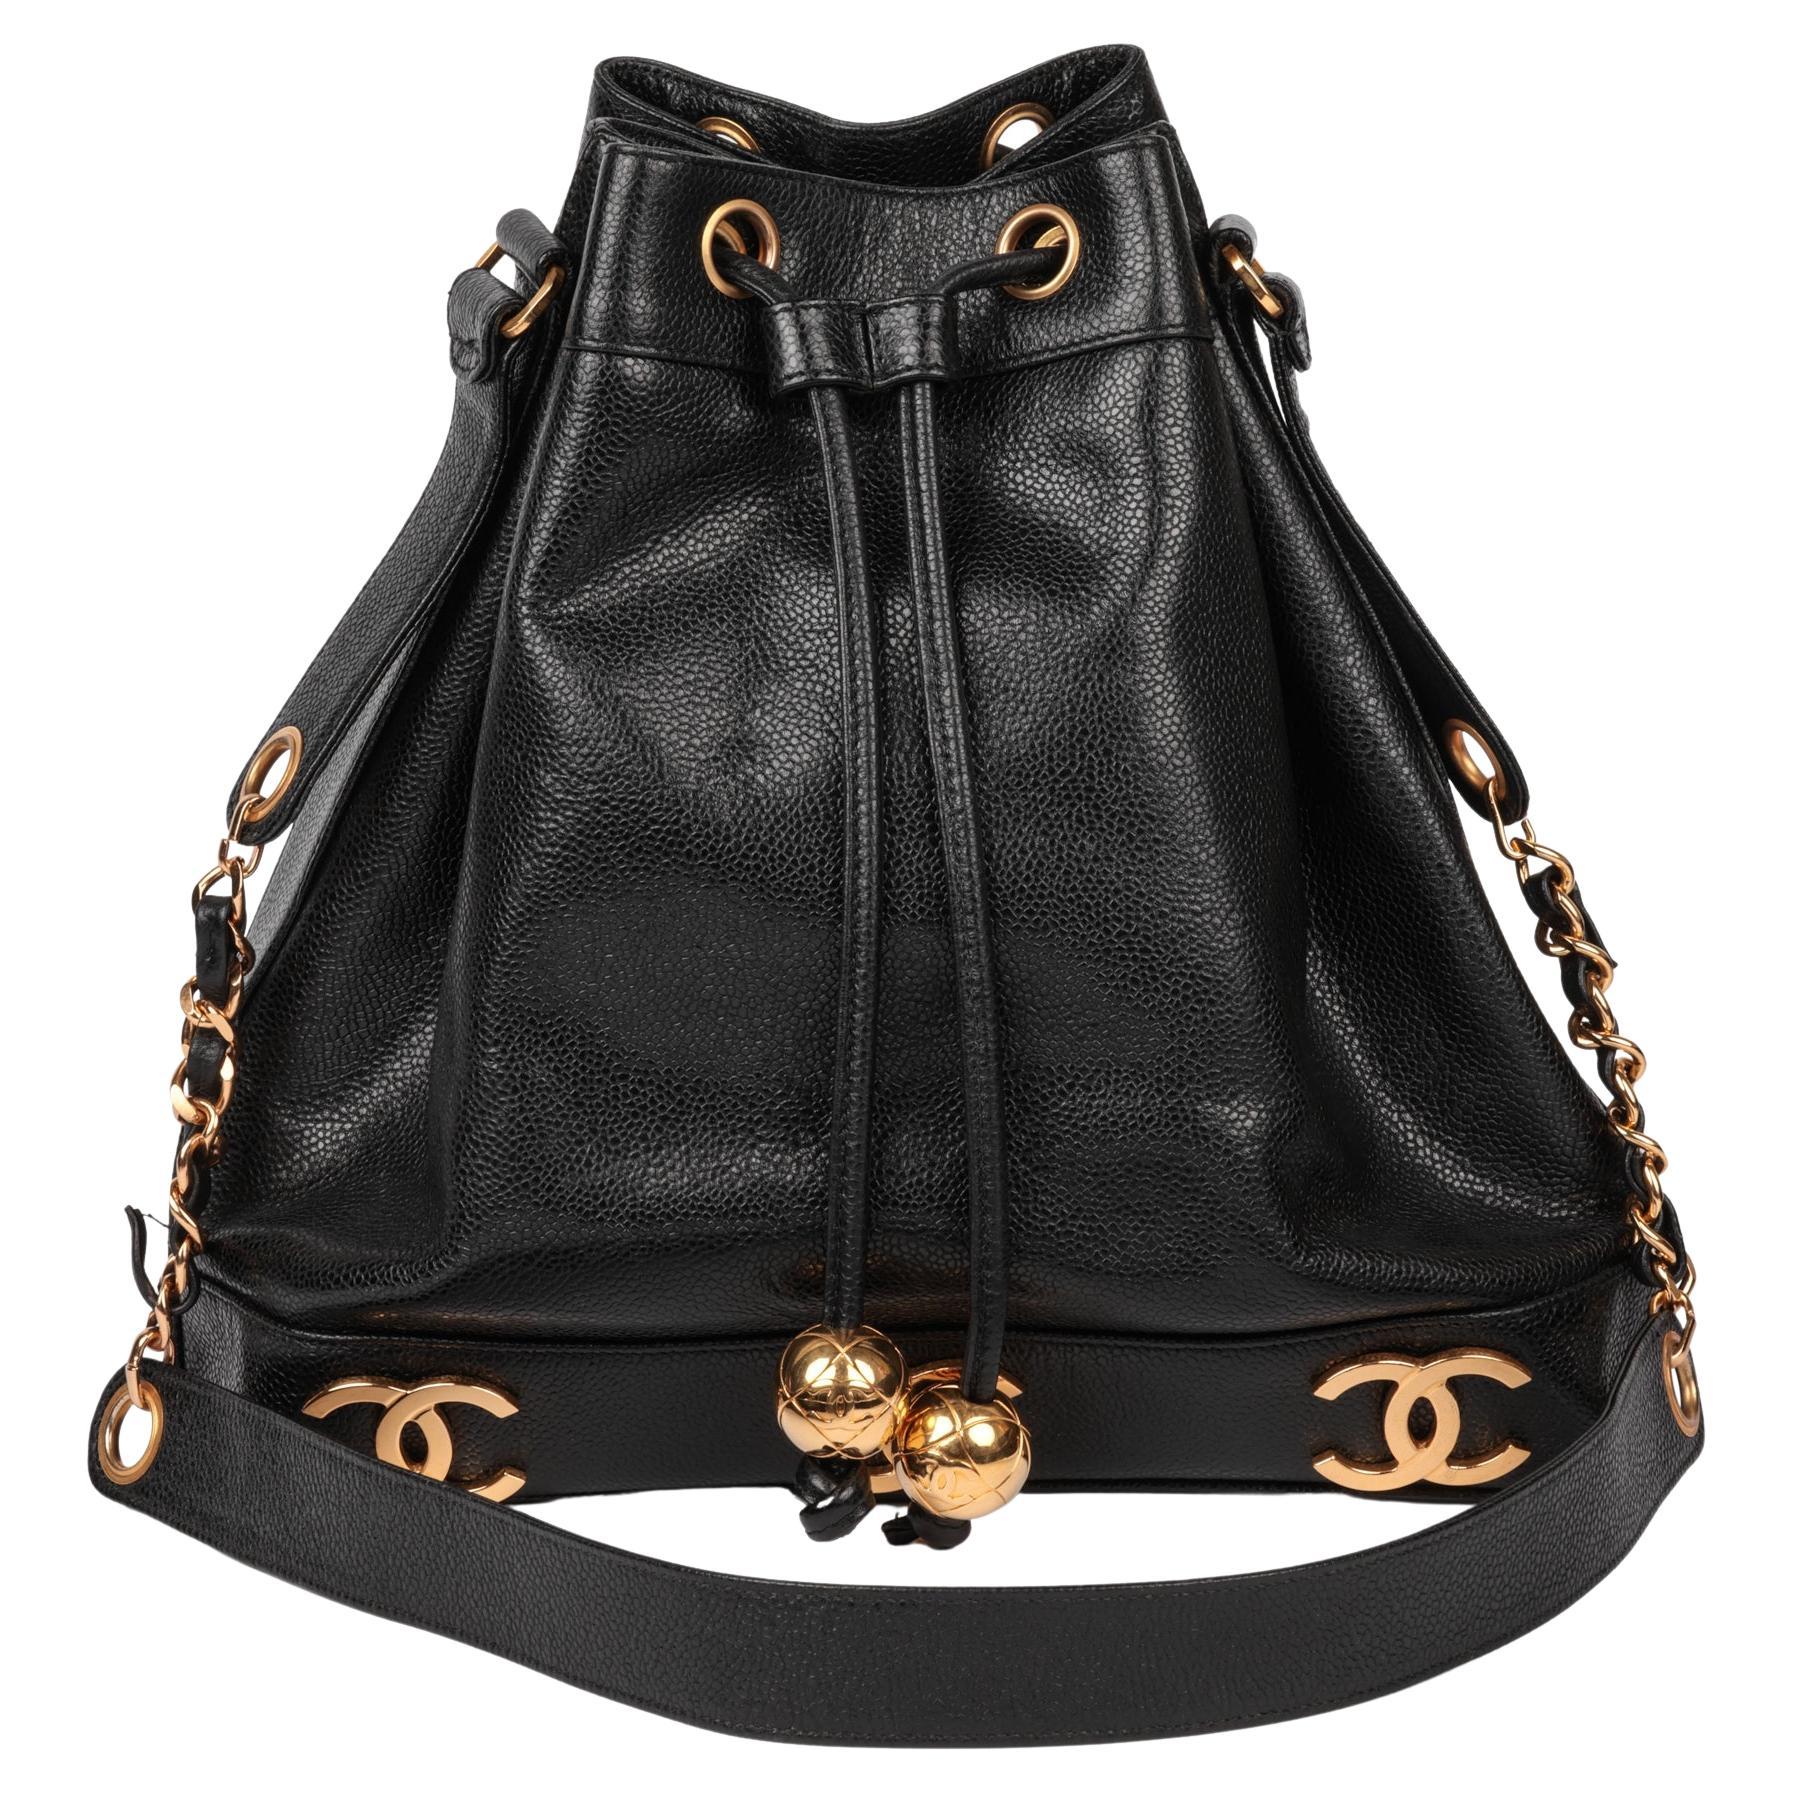 CHANEL Black Caviar Leather Vintage Classic Logo Trim Bucket Bag with Pouch For Sale